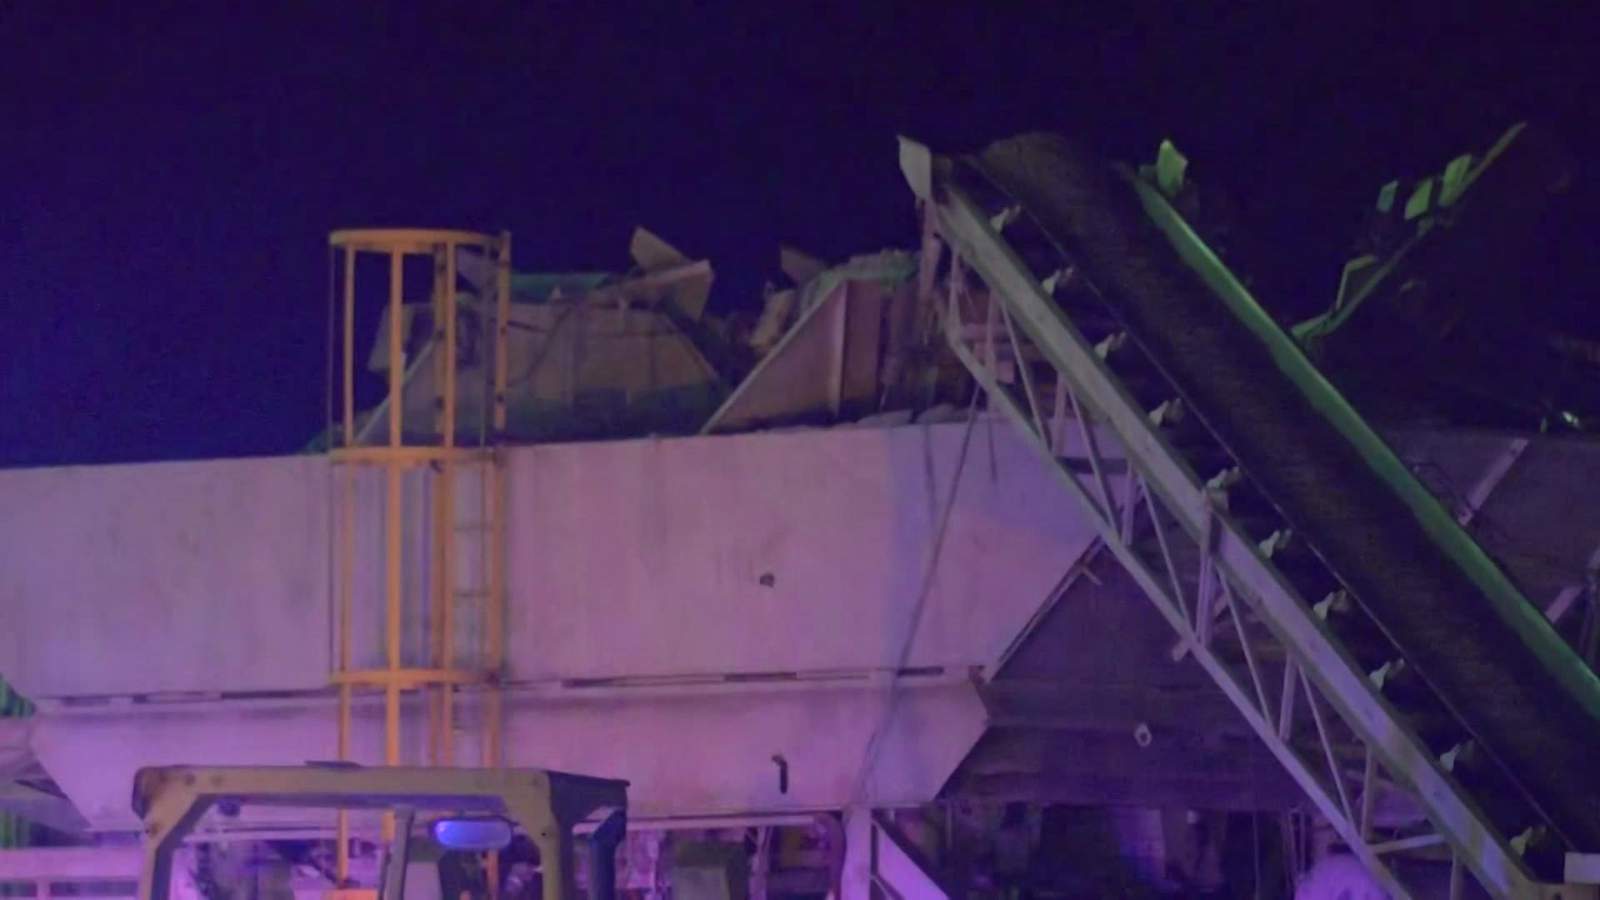 Employee dies after being trapped inside concrete hopper car in Rosenberg, sheriff’s deputies say